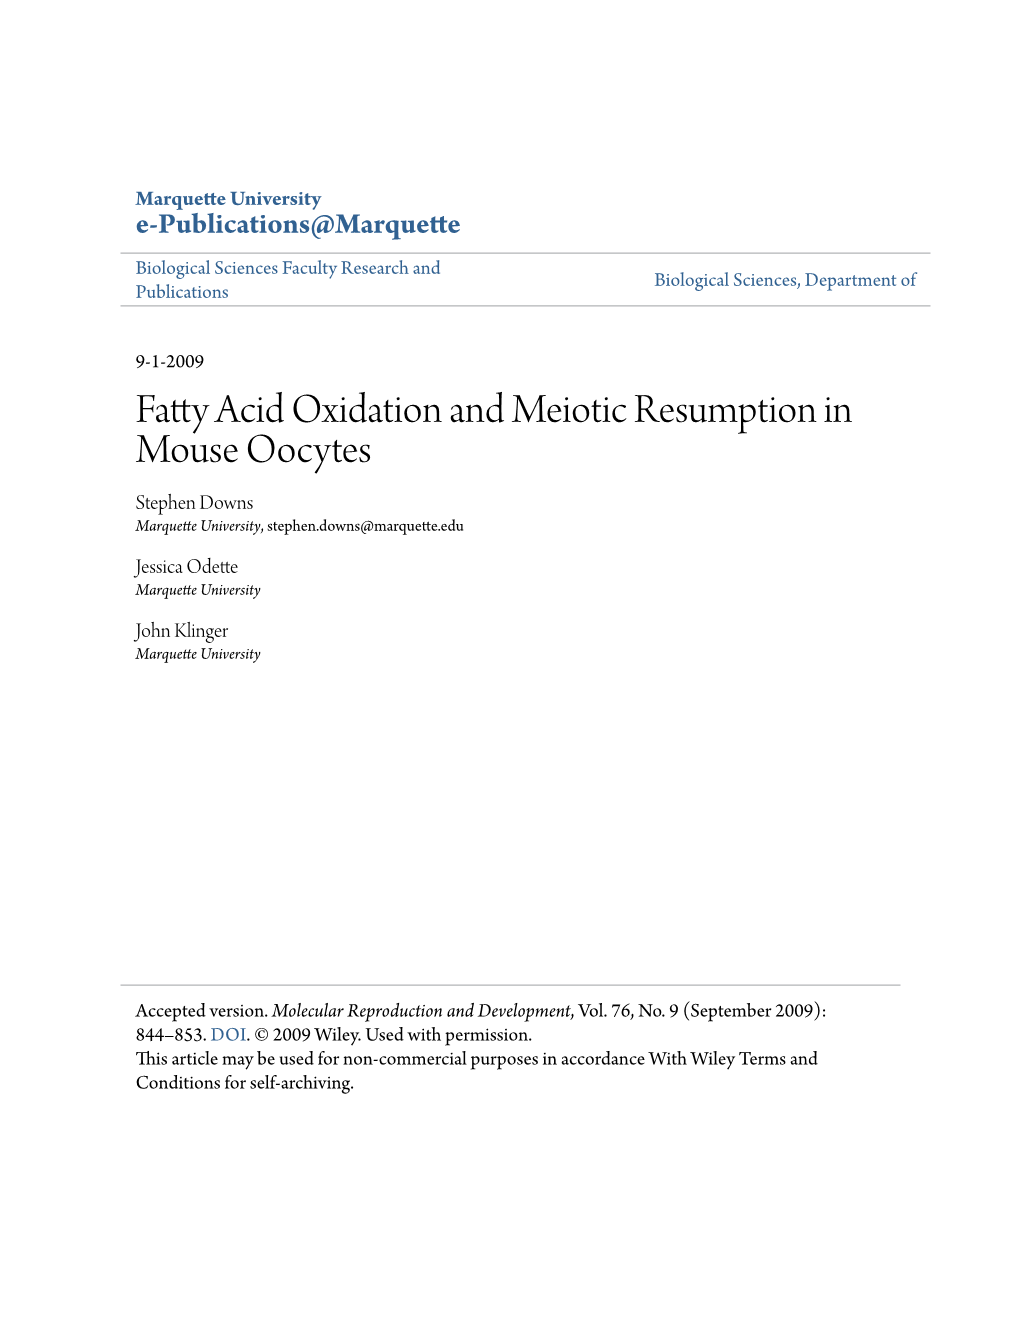 Fatty Acid Oxidation and Meiotic Resumption in Mouse Oocytes Stephen Downs Marquette University, Stephen.Downs@Marquette.Edu